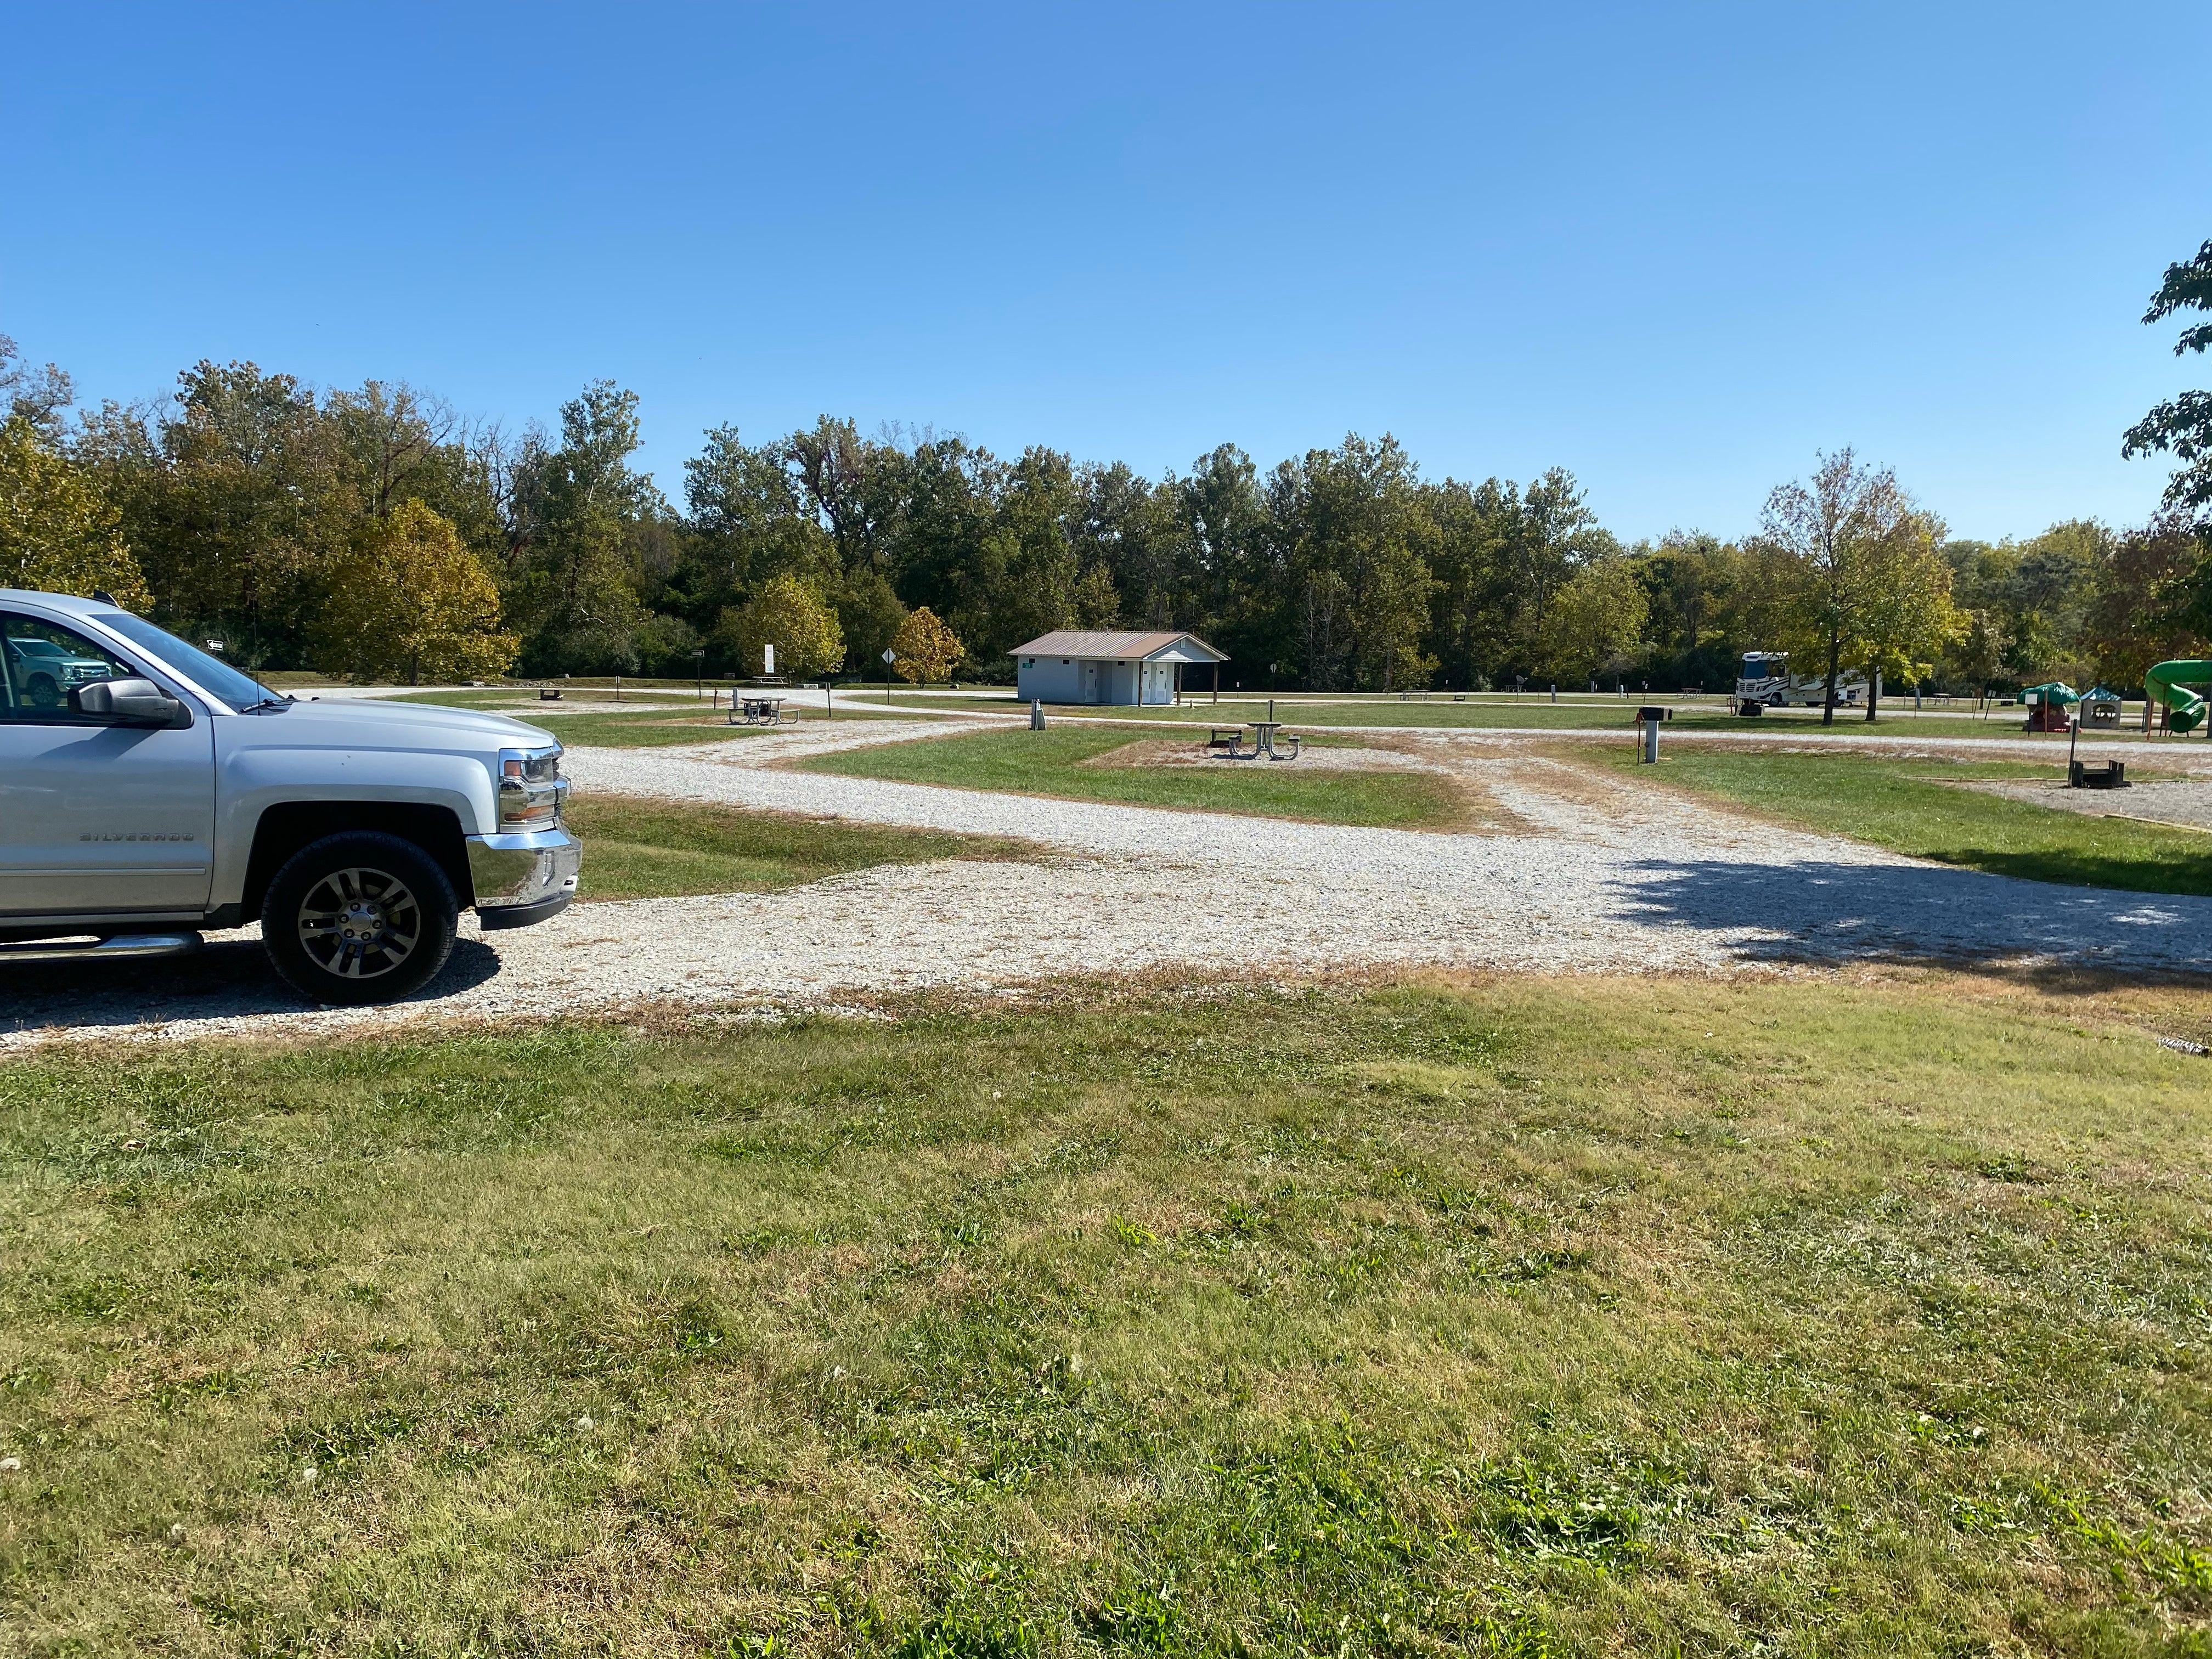 Camper submitted image from Camp Atterbury Campground - 4